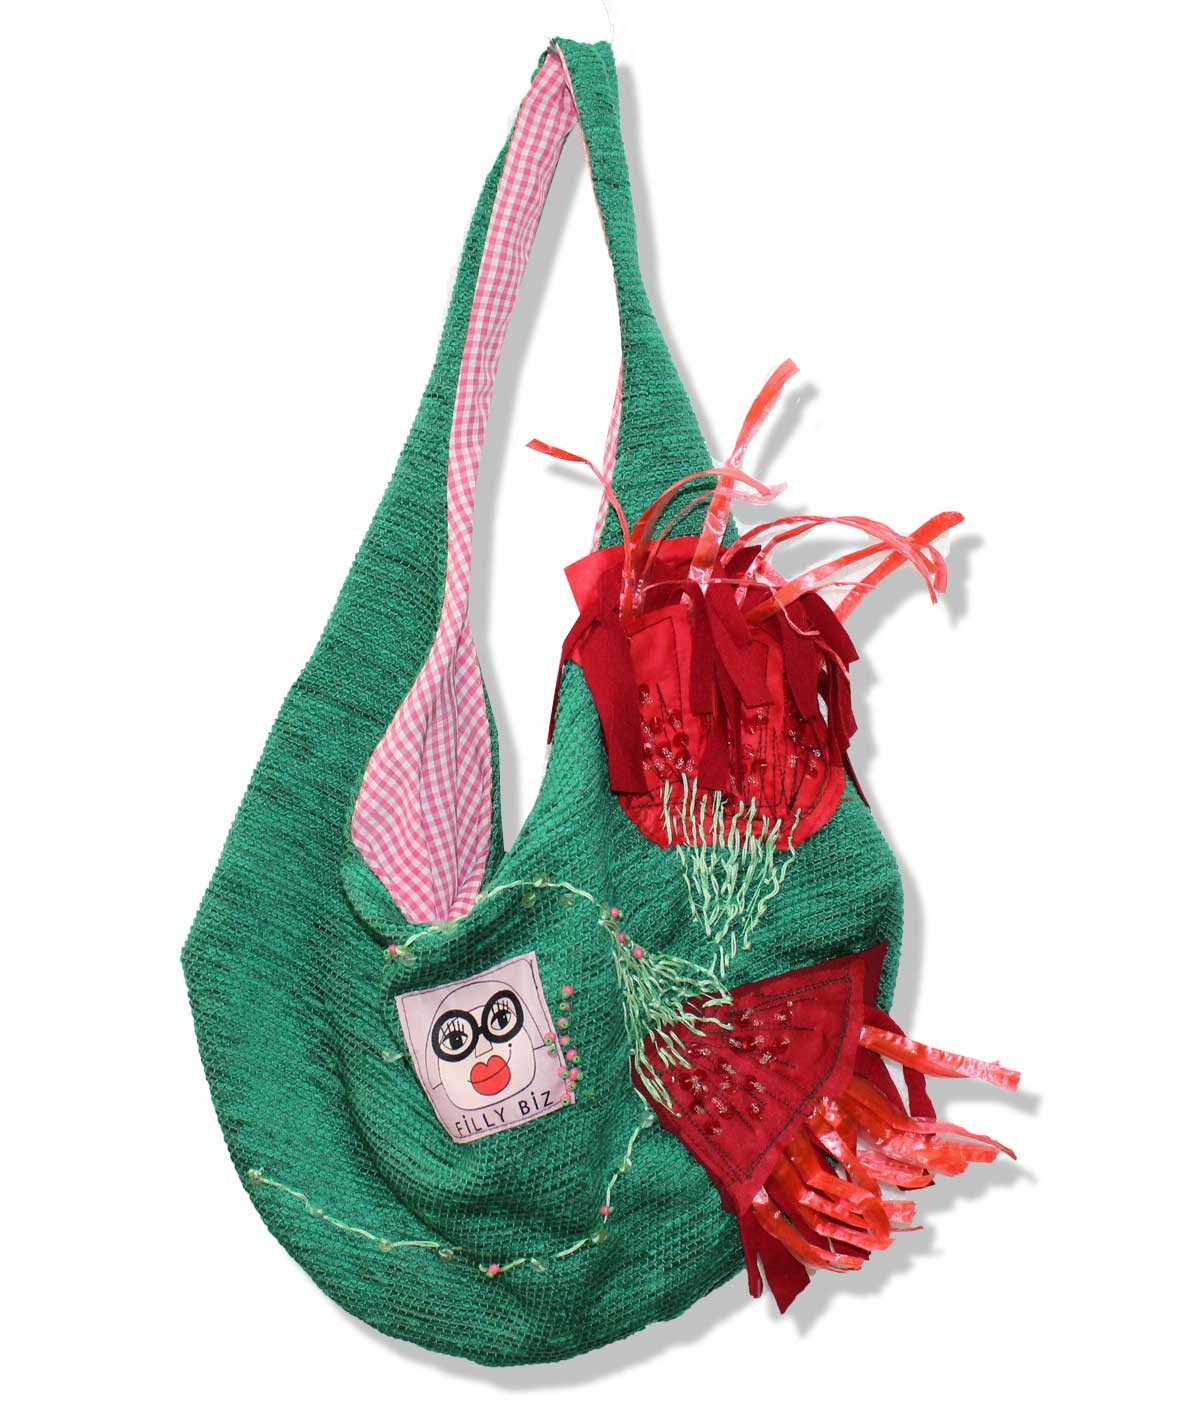 Round green bag with poppies